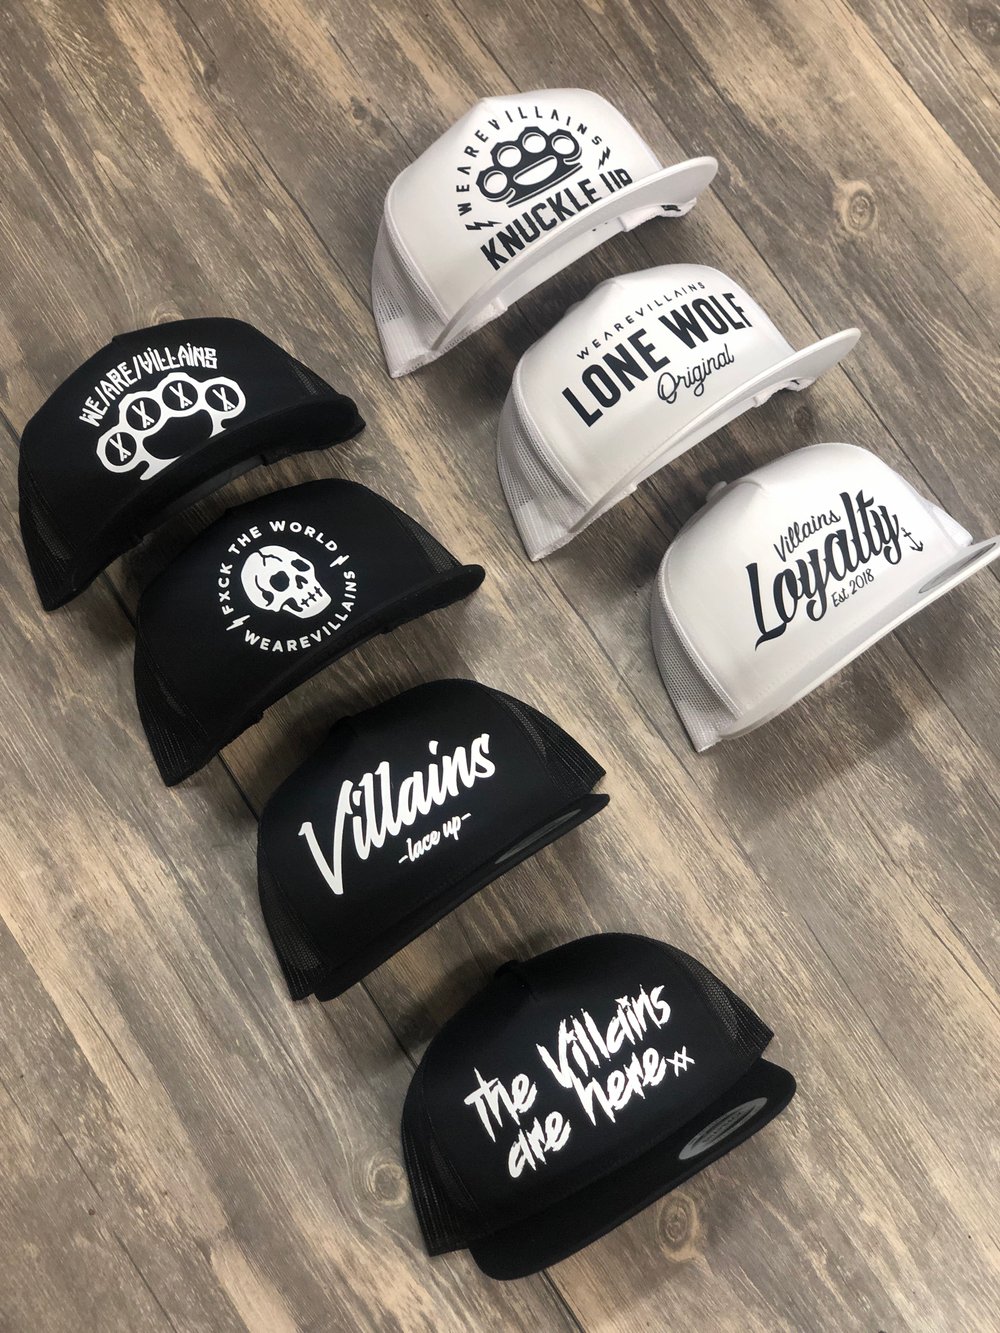 *NEW* SnapBacks and colorways